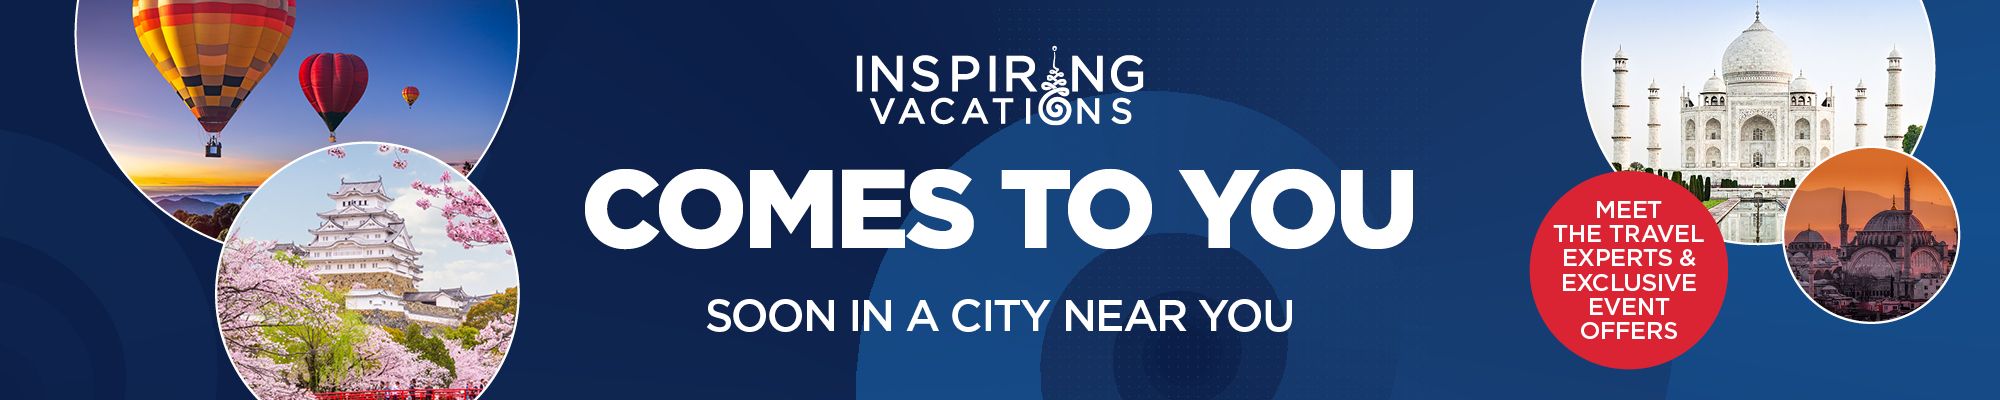 Inspiring Vacations Comes To You